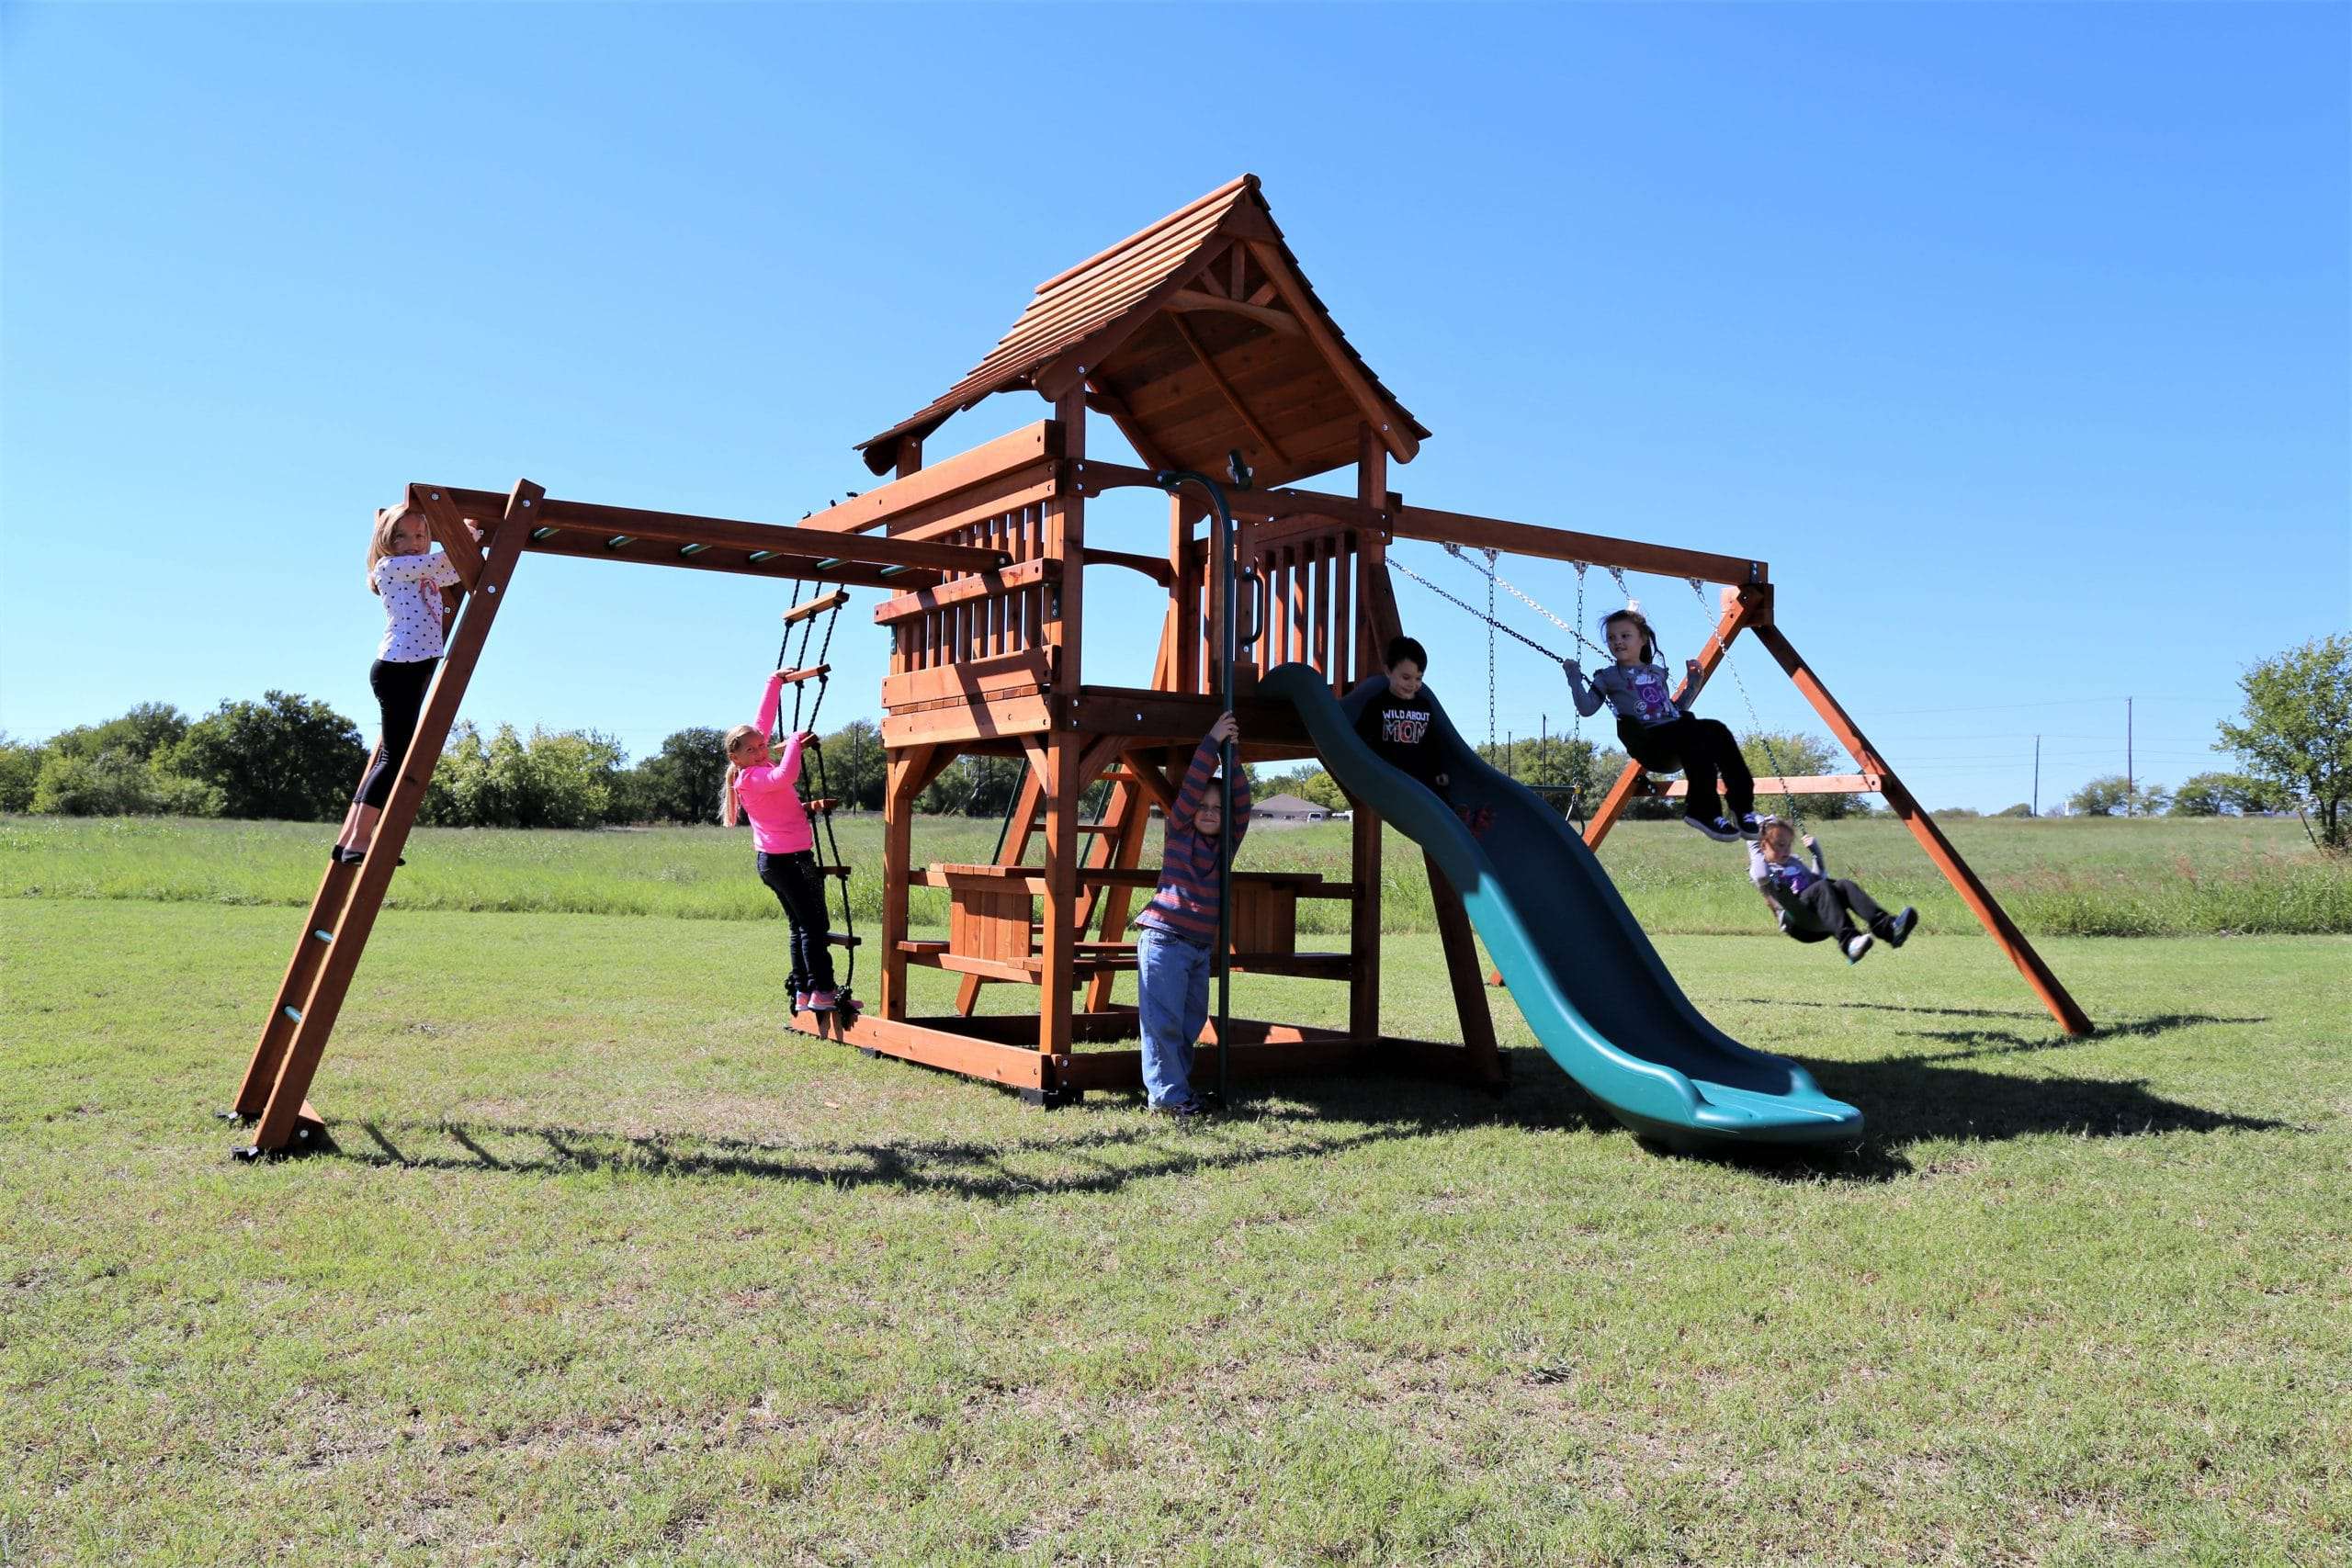 Waxahachie, Texas, fun shack swing set with monkey bars rope ladder climber picnic table swings and slide